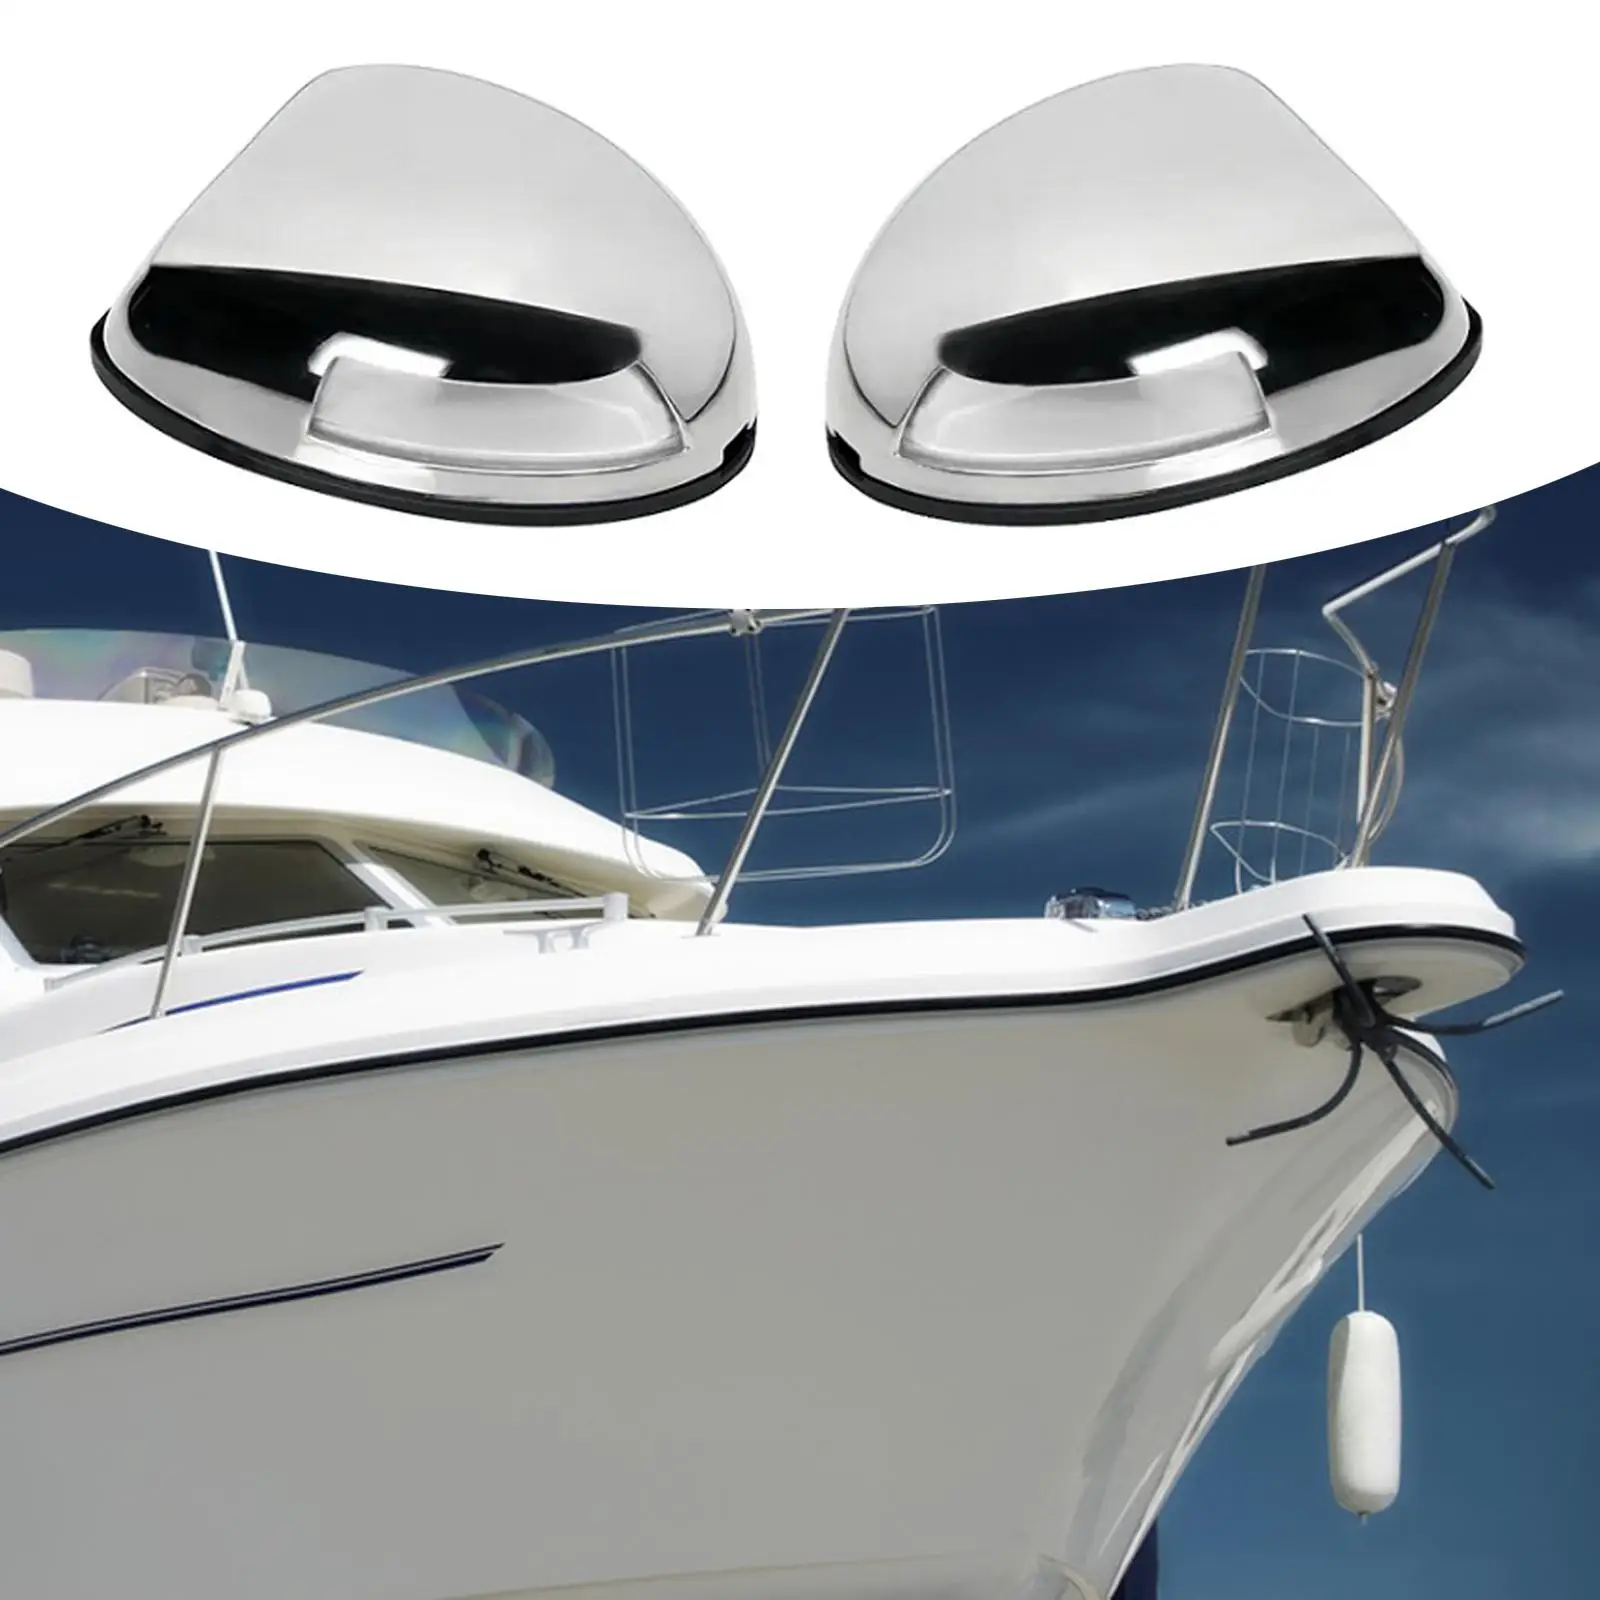 Boat Navigation Lights Double Night Boat Lights Stainless Steel IP66 Waterproof E011070 Red Light for Pontoon Yacht